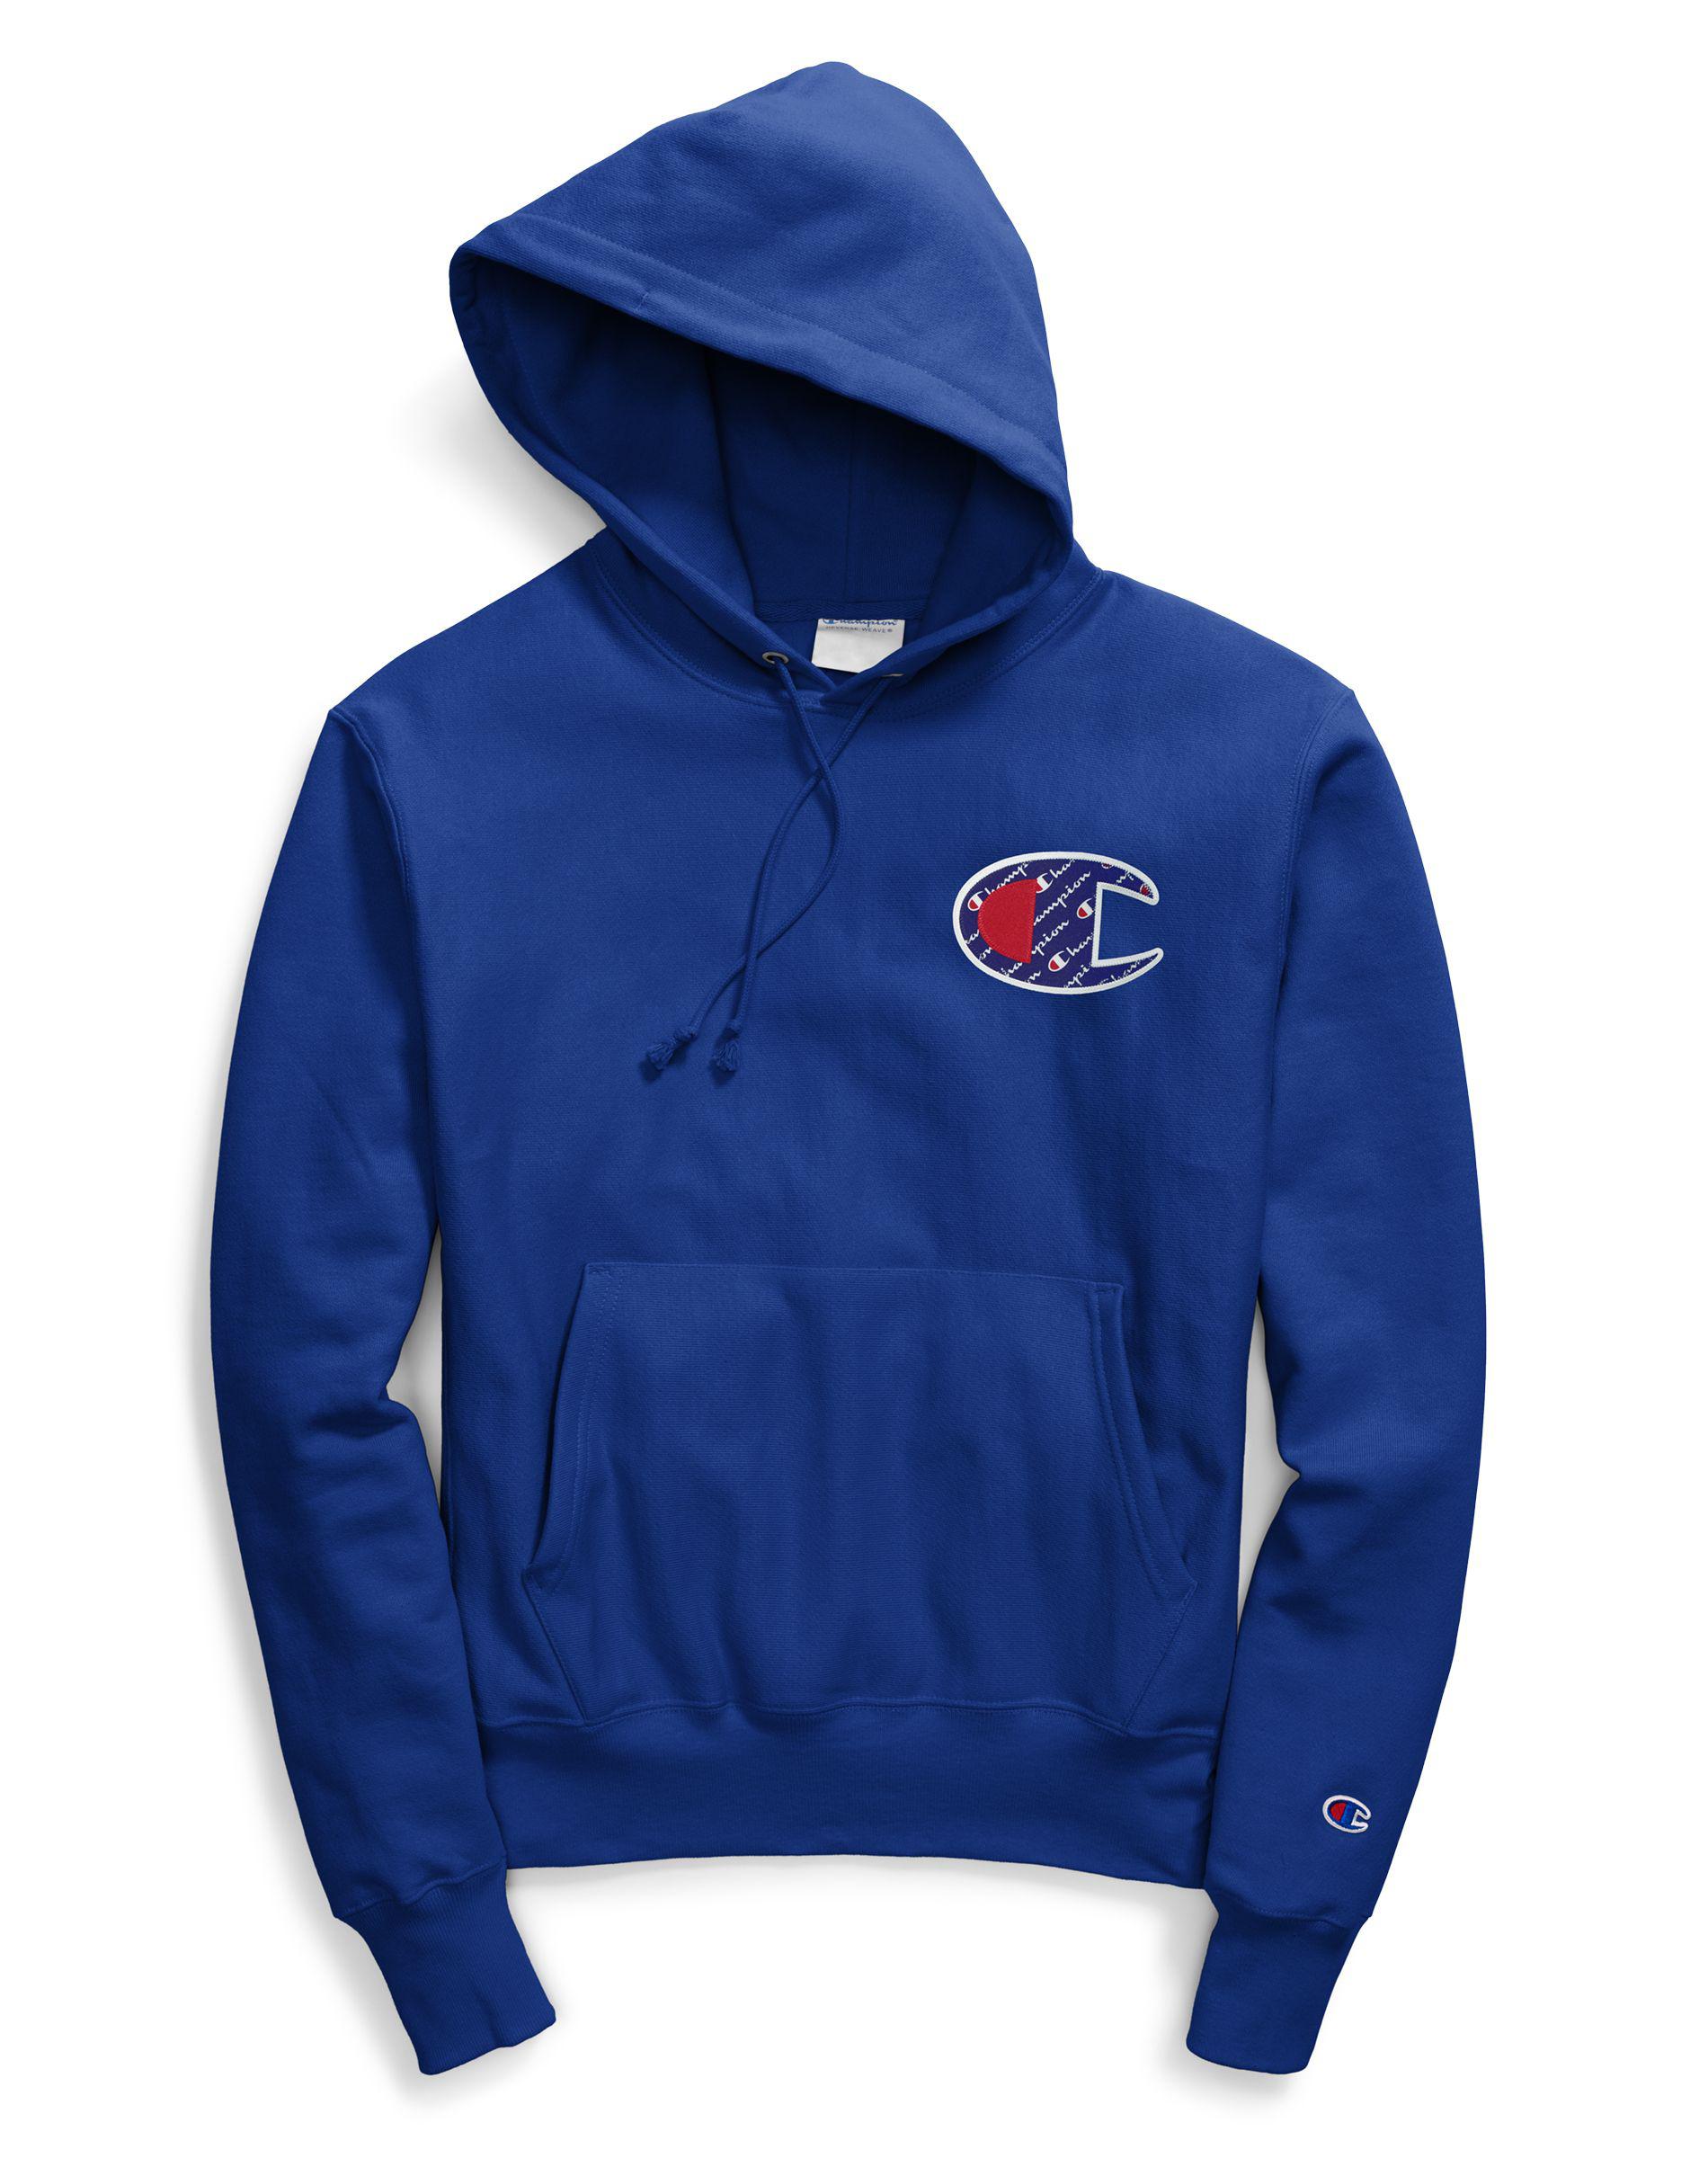 Champion LIFE Mens Reverse Weave Pullover Hoodie surf The Web//Sublimated c Logo Large